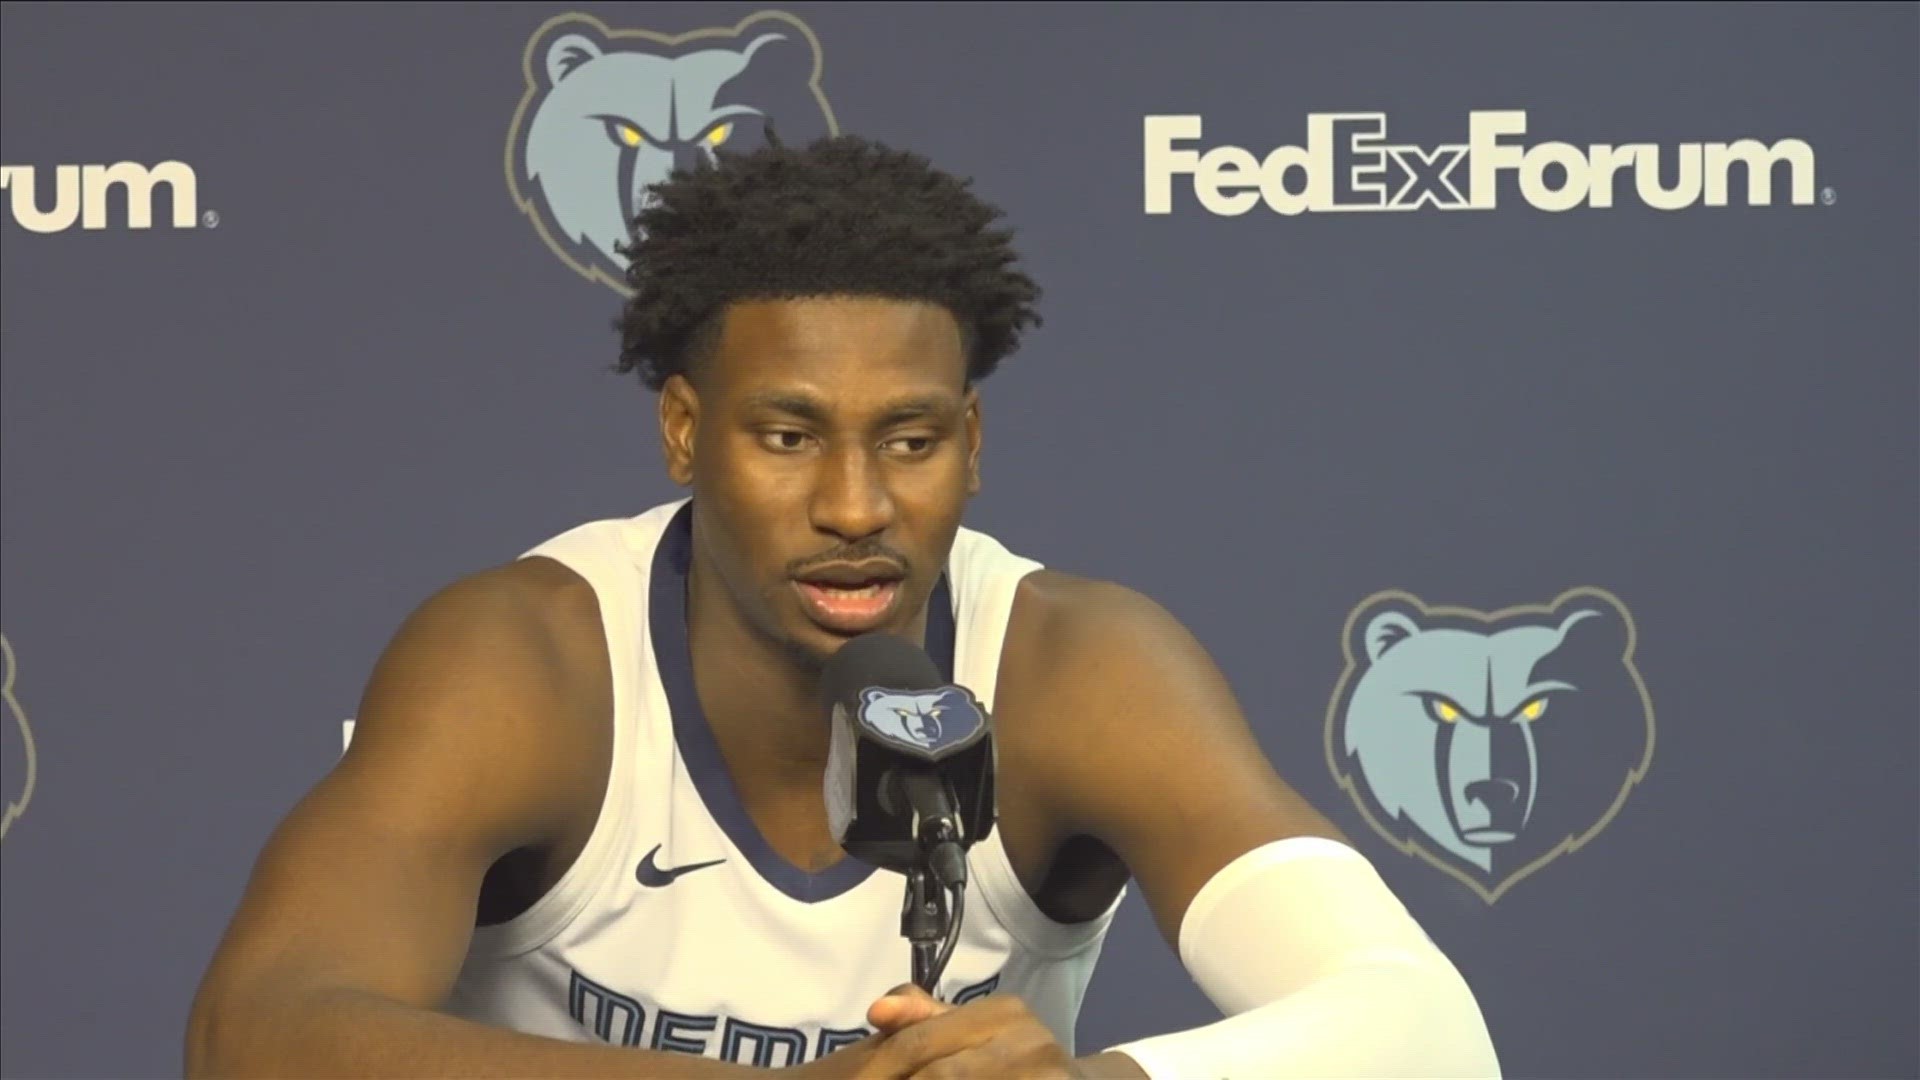 All your Memphis sports news in 91 seconds... with a little bit more on a day with as many conversations as "Grizzlies Media Day."